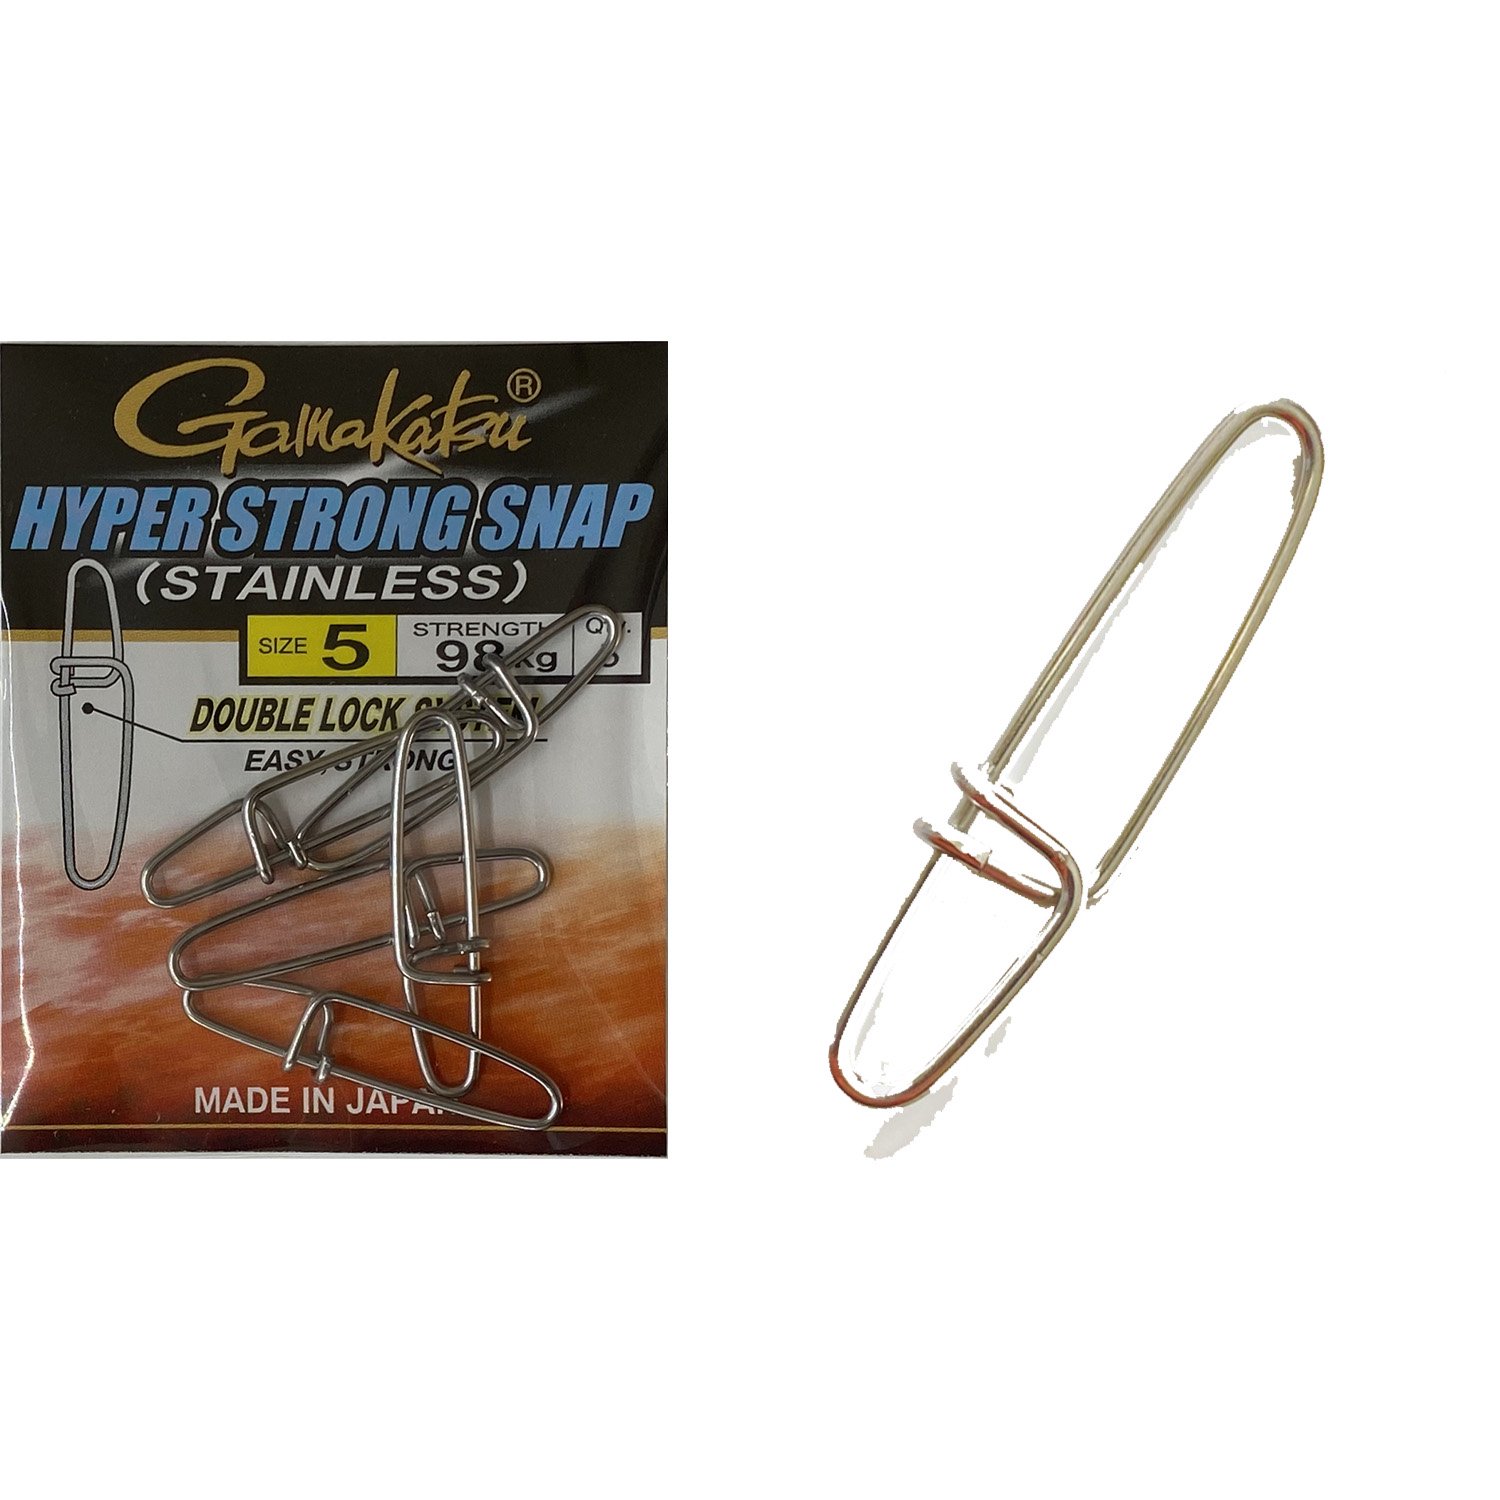 Agrafe Hyper Strong Snap Stainless Gamakatsu